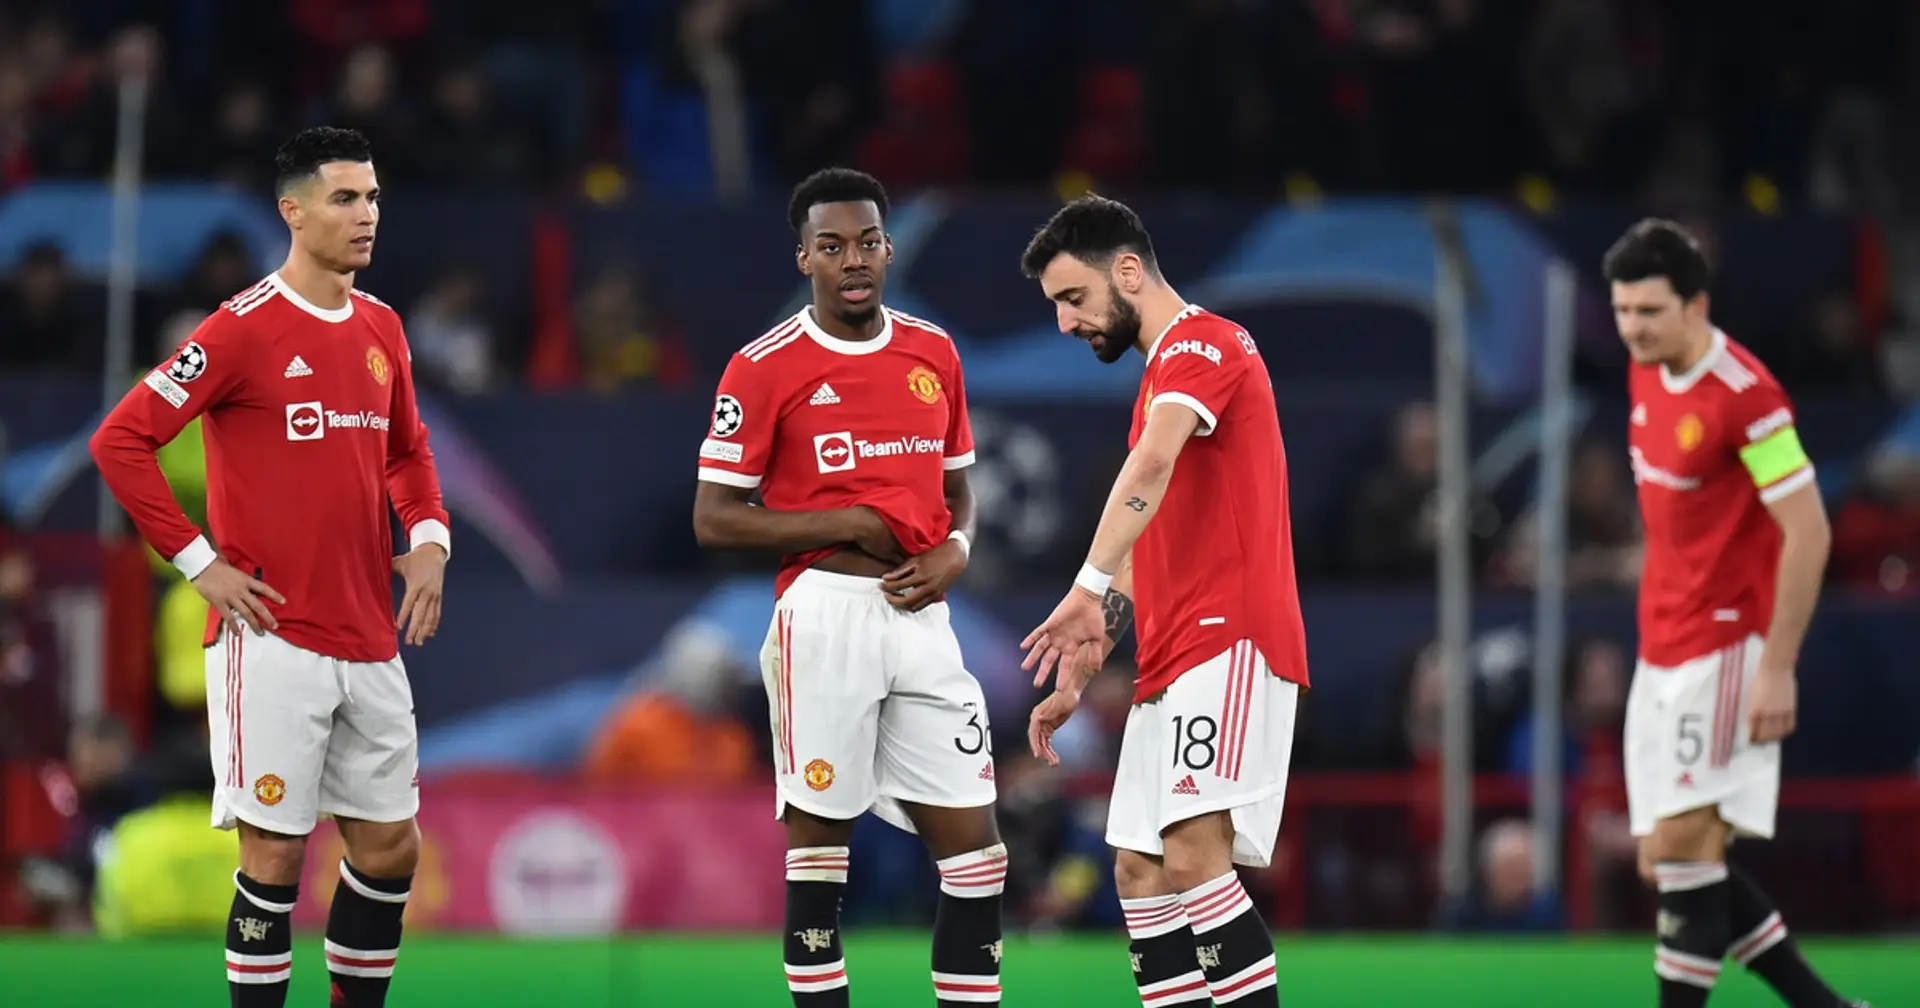 Man United crash out of the Champions League after Atletico Madrid defeat